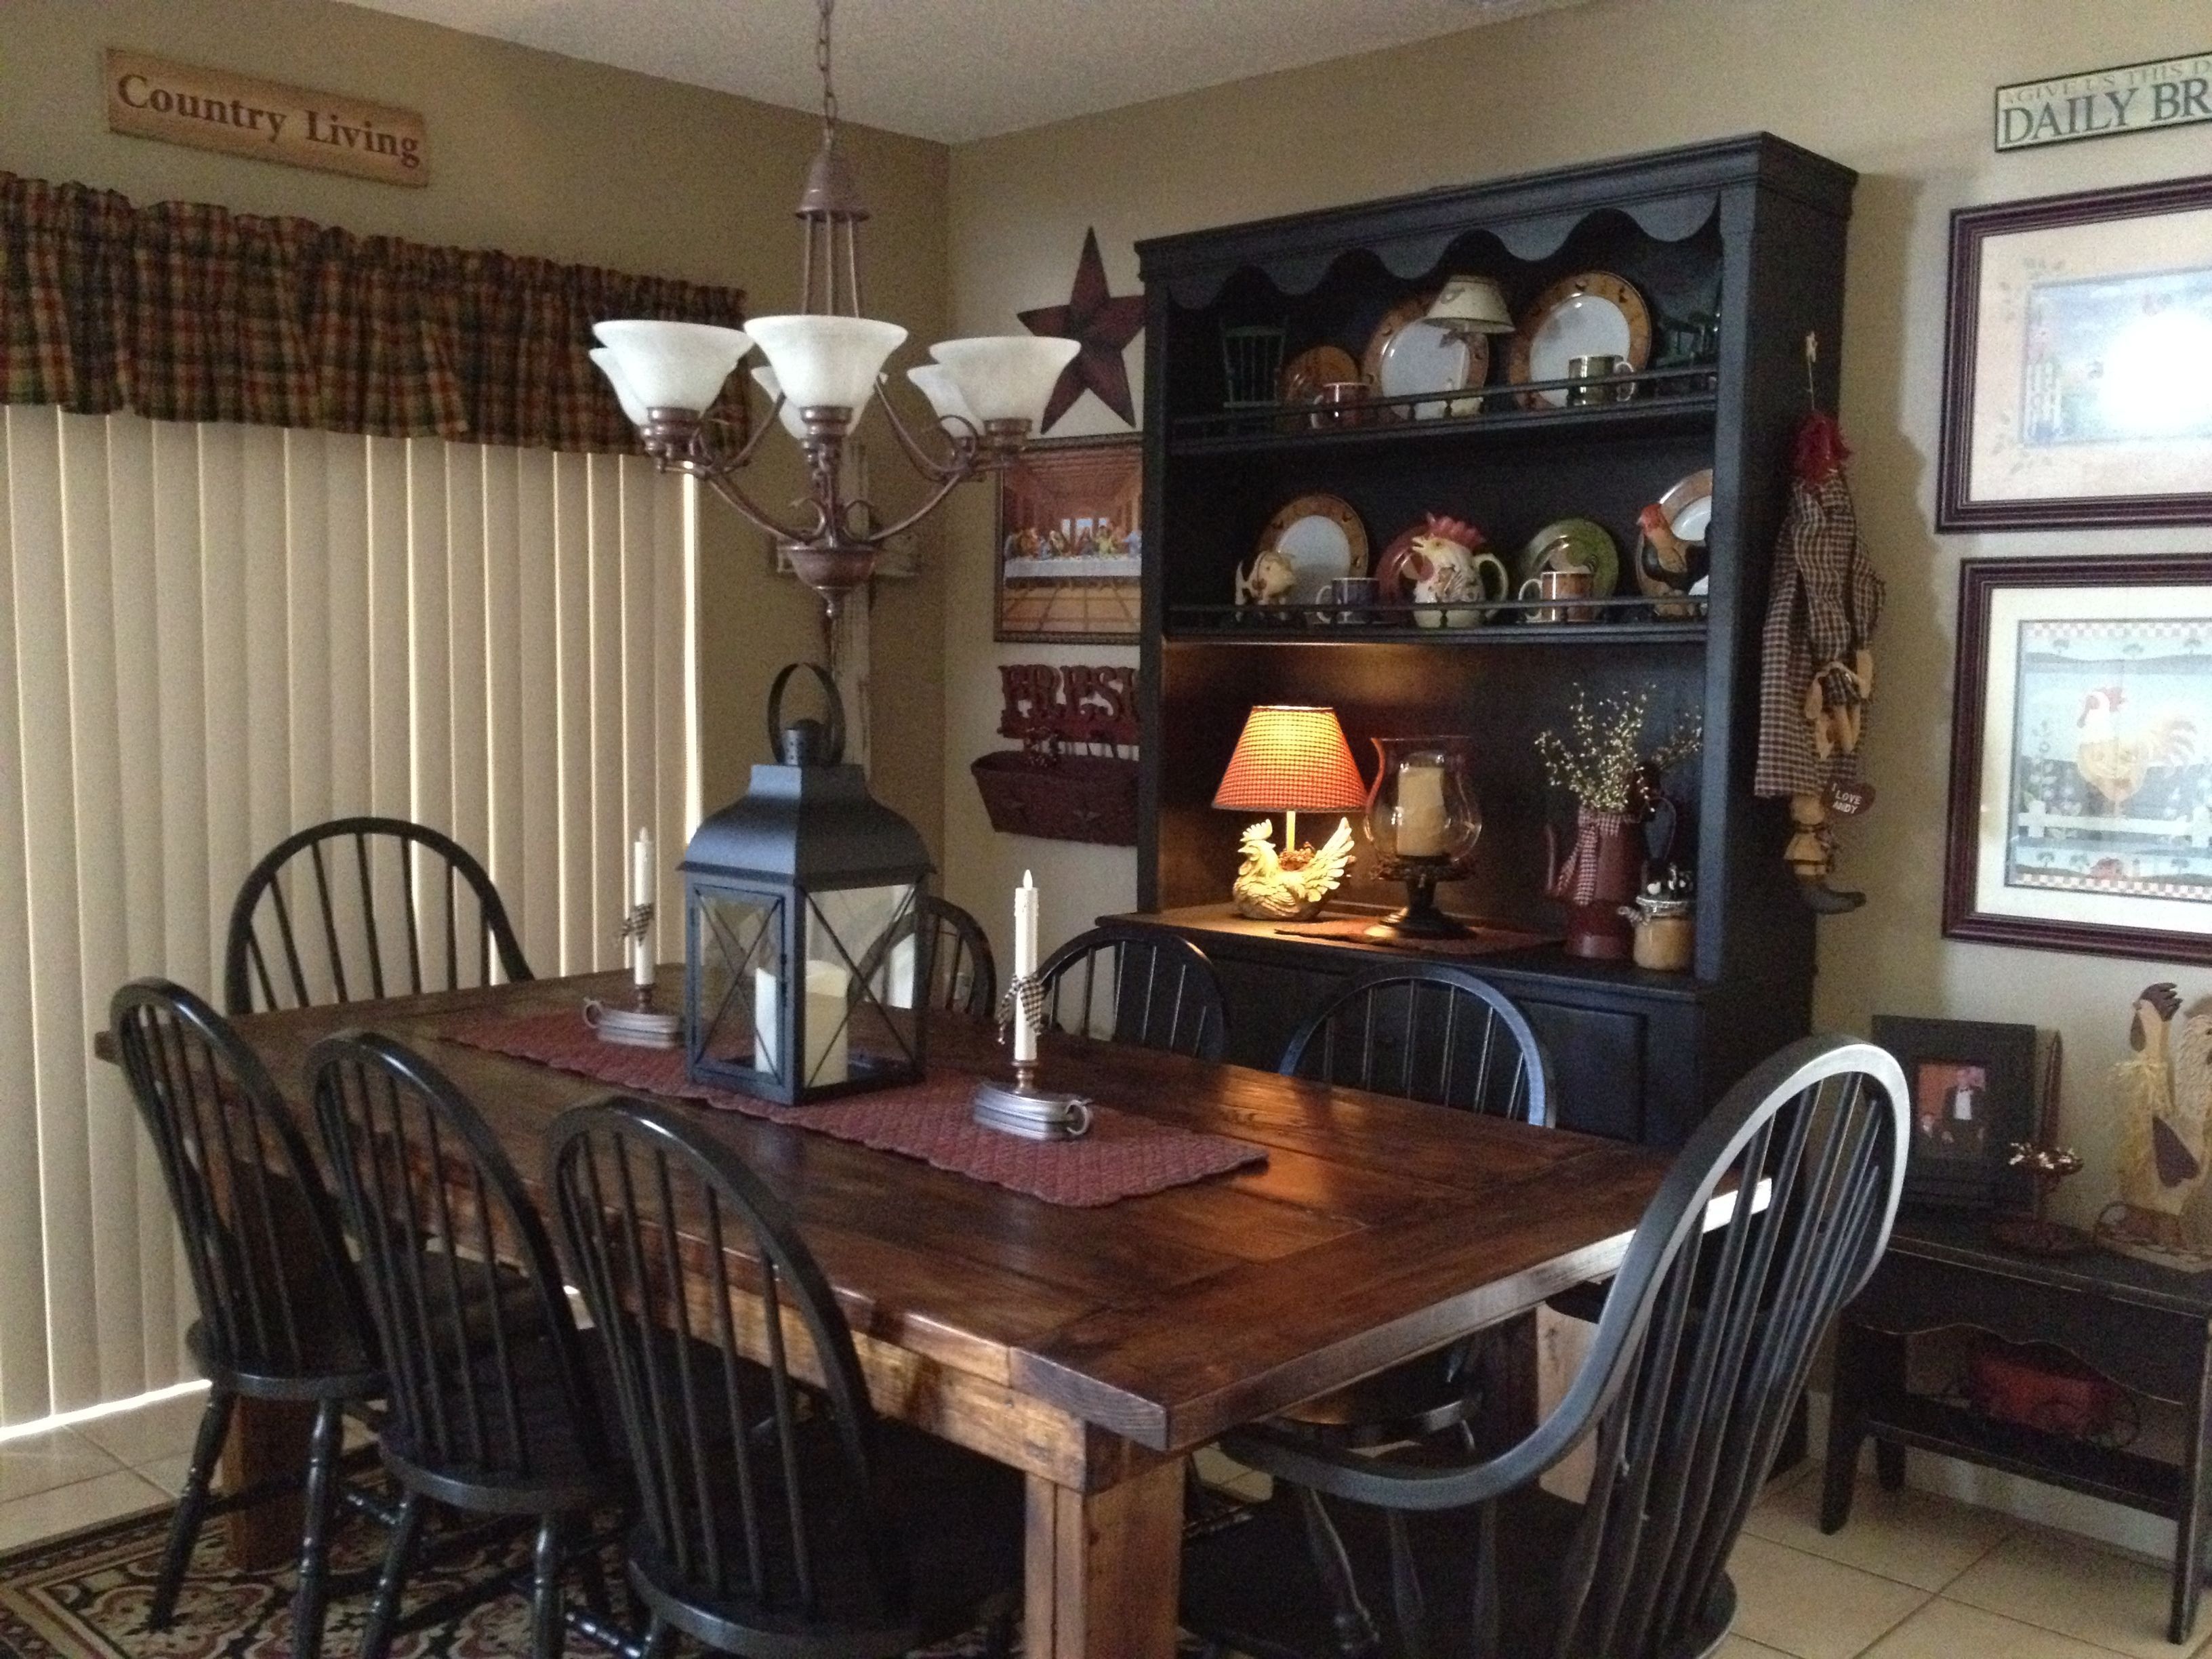 Reinert 5 Piece Dining Sets Inside Favorite Love This Dining Room … (View 12 of 20)